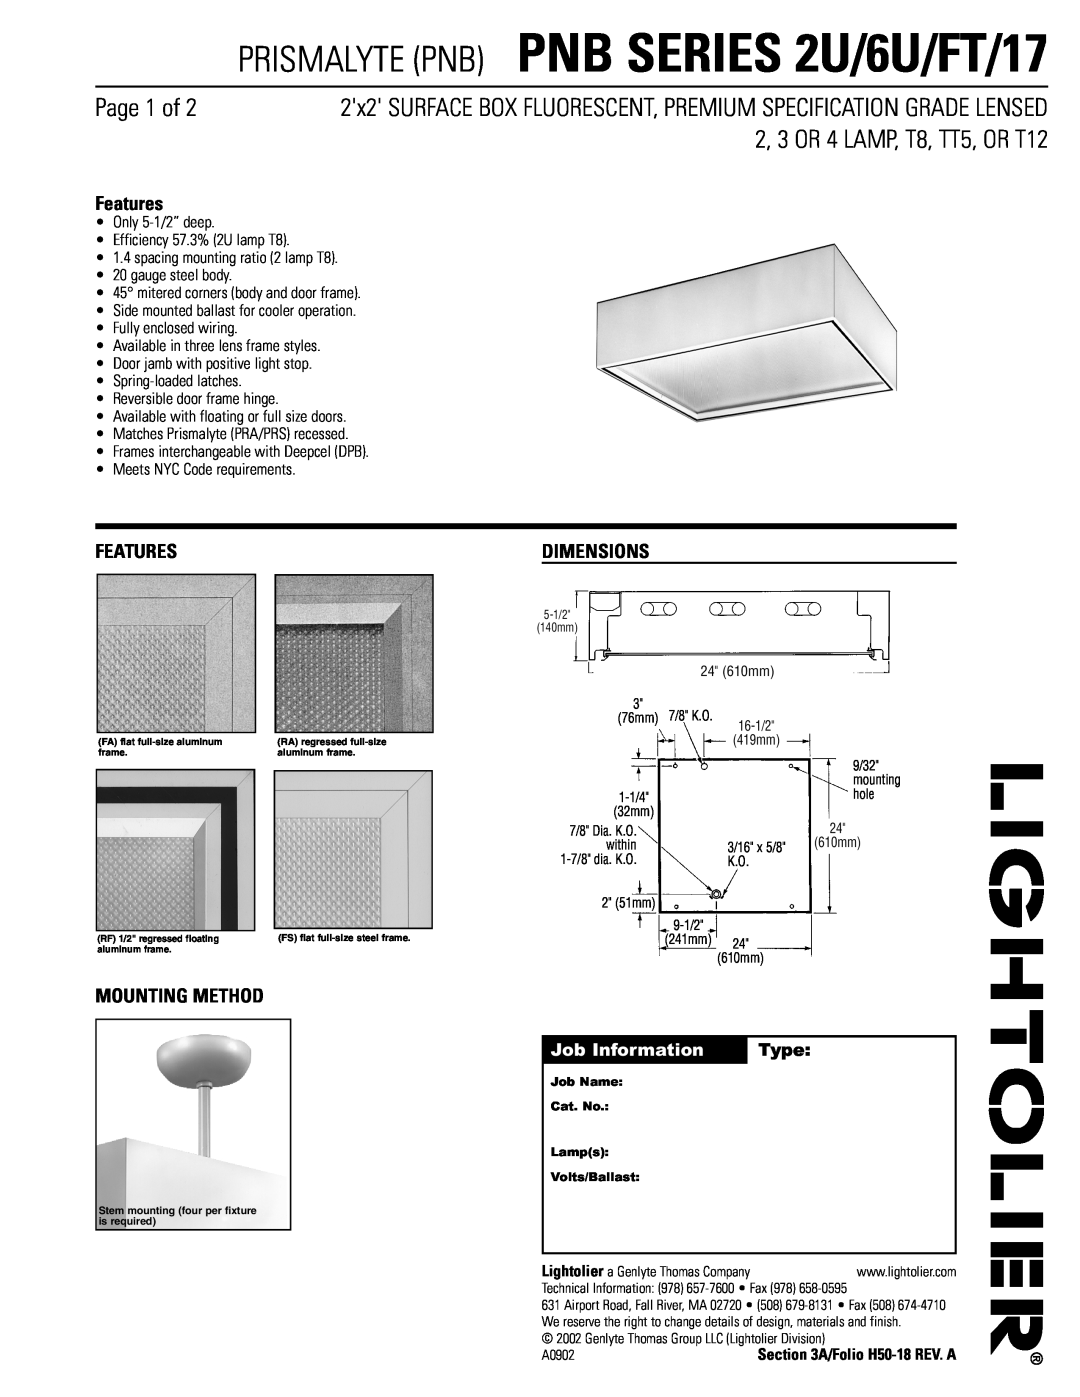 Lightolier PNB SERIES 2U/6U/FT/17 dimensions Page 1 of, 2, 3 OR 4 LAMP, T8, TT5, OR T12, Features, Mounting Method, Type 